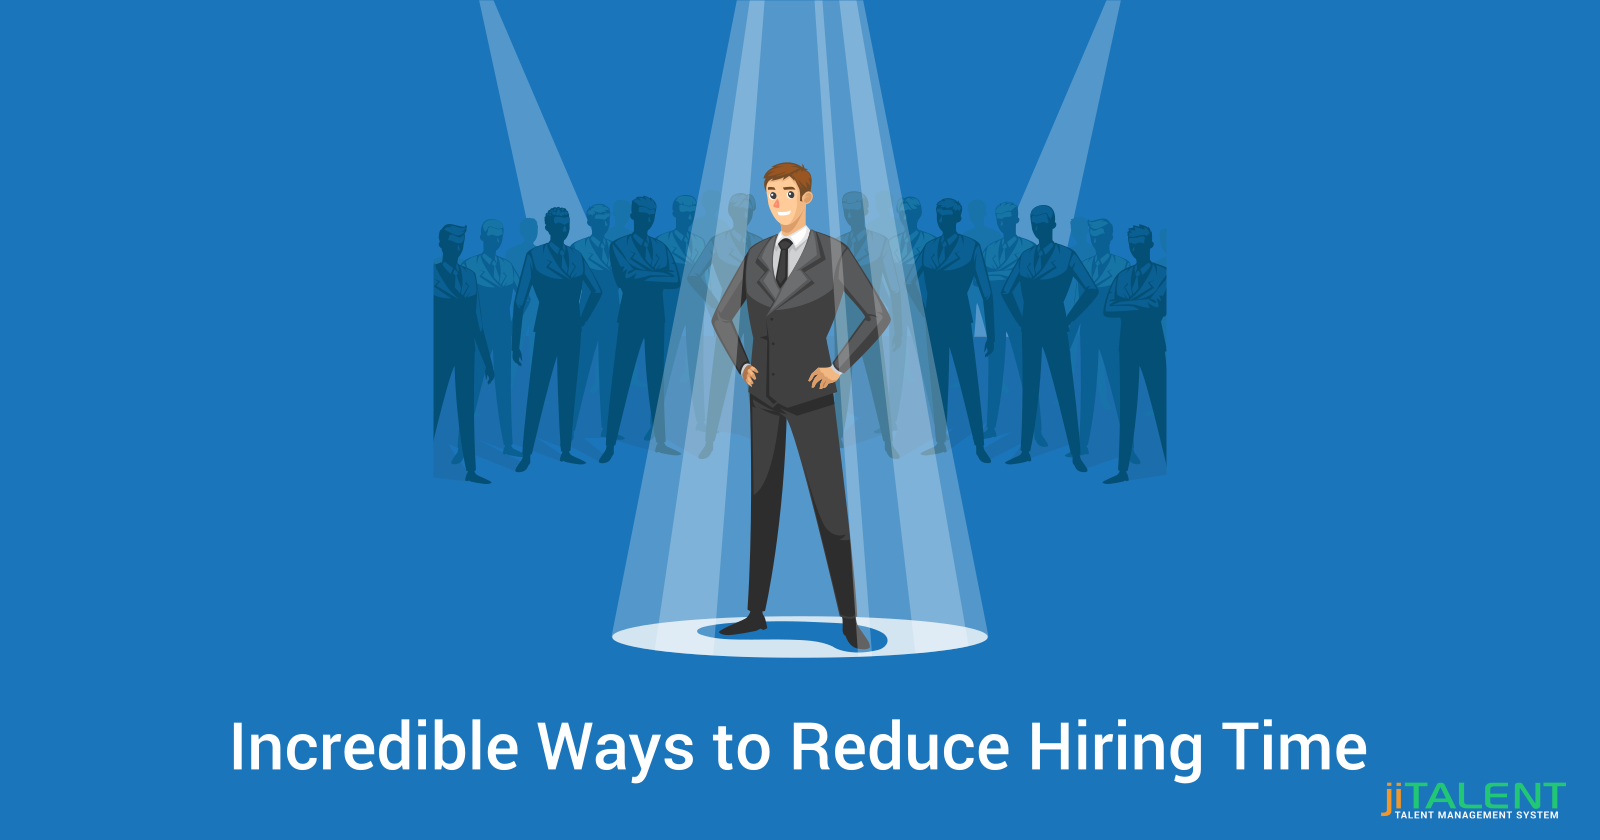 Reduce Hiring Time With These Simple Tips